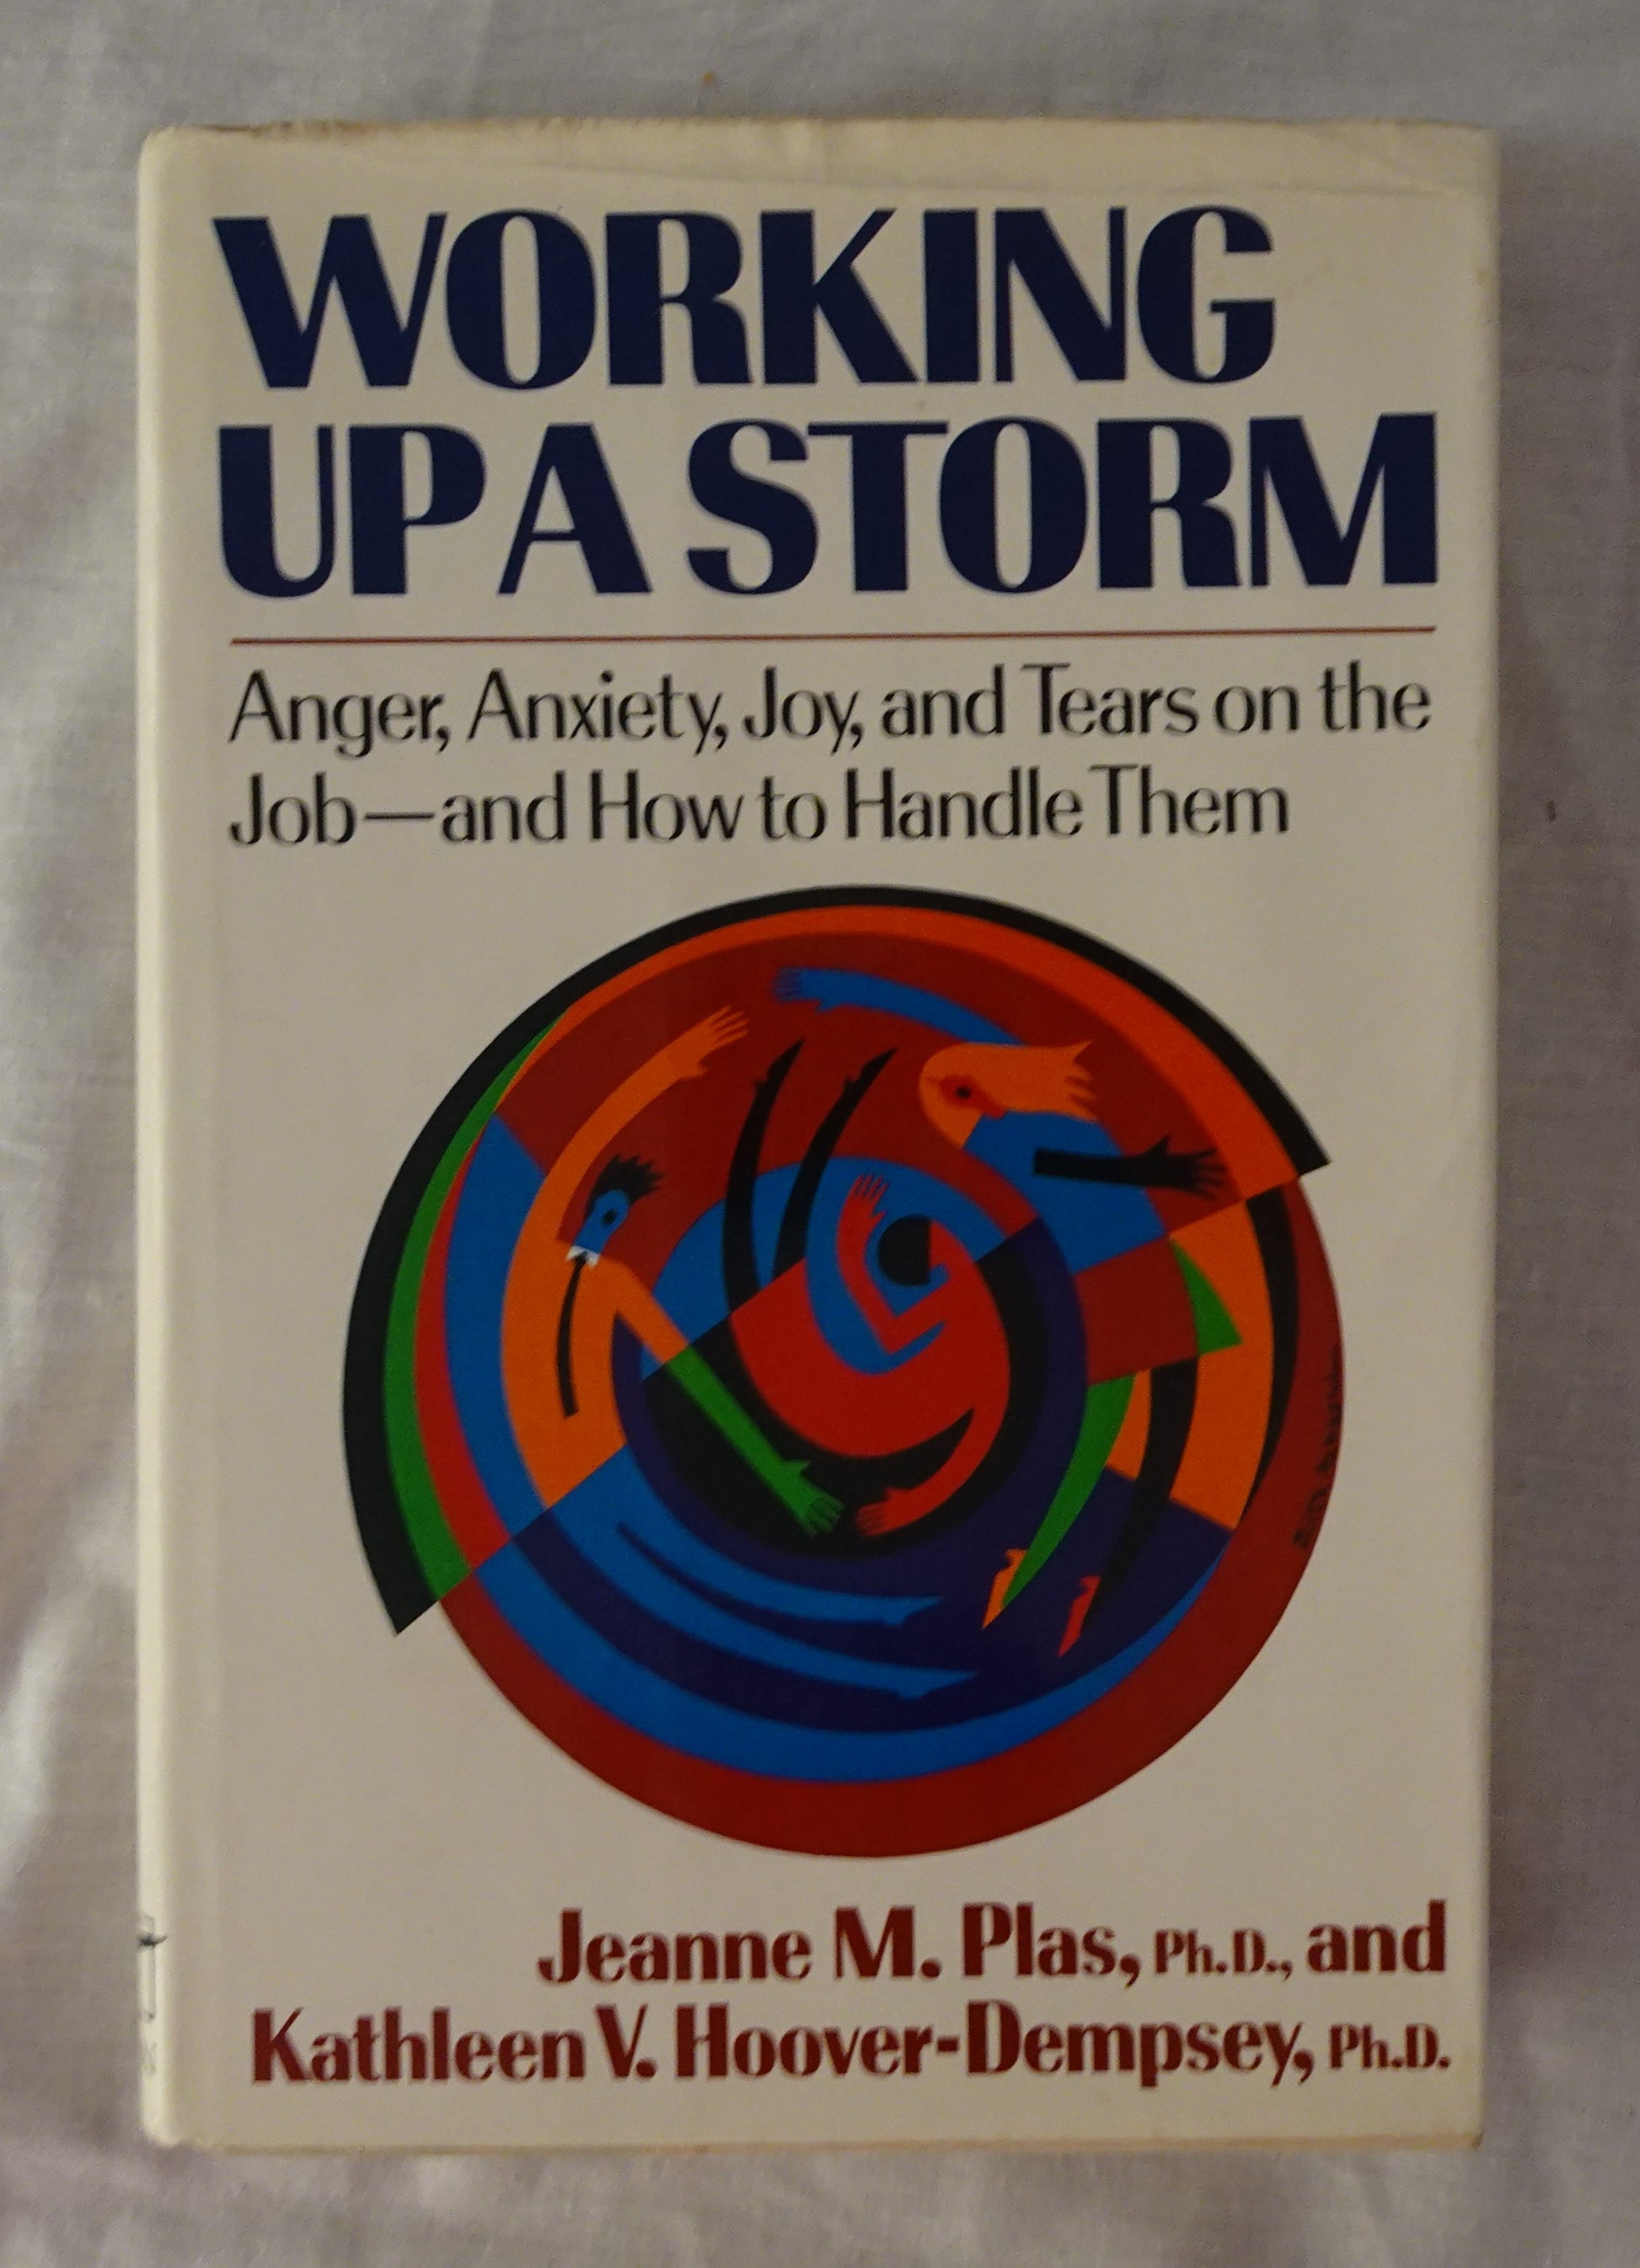 Working Up a Storm  Anger, Anxiety, Joy and Tears on the Job  by Jeanne M. Plas and Kathleen V. Hoover-Dempsey